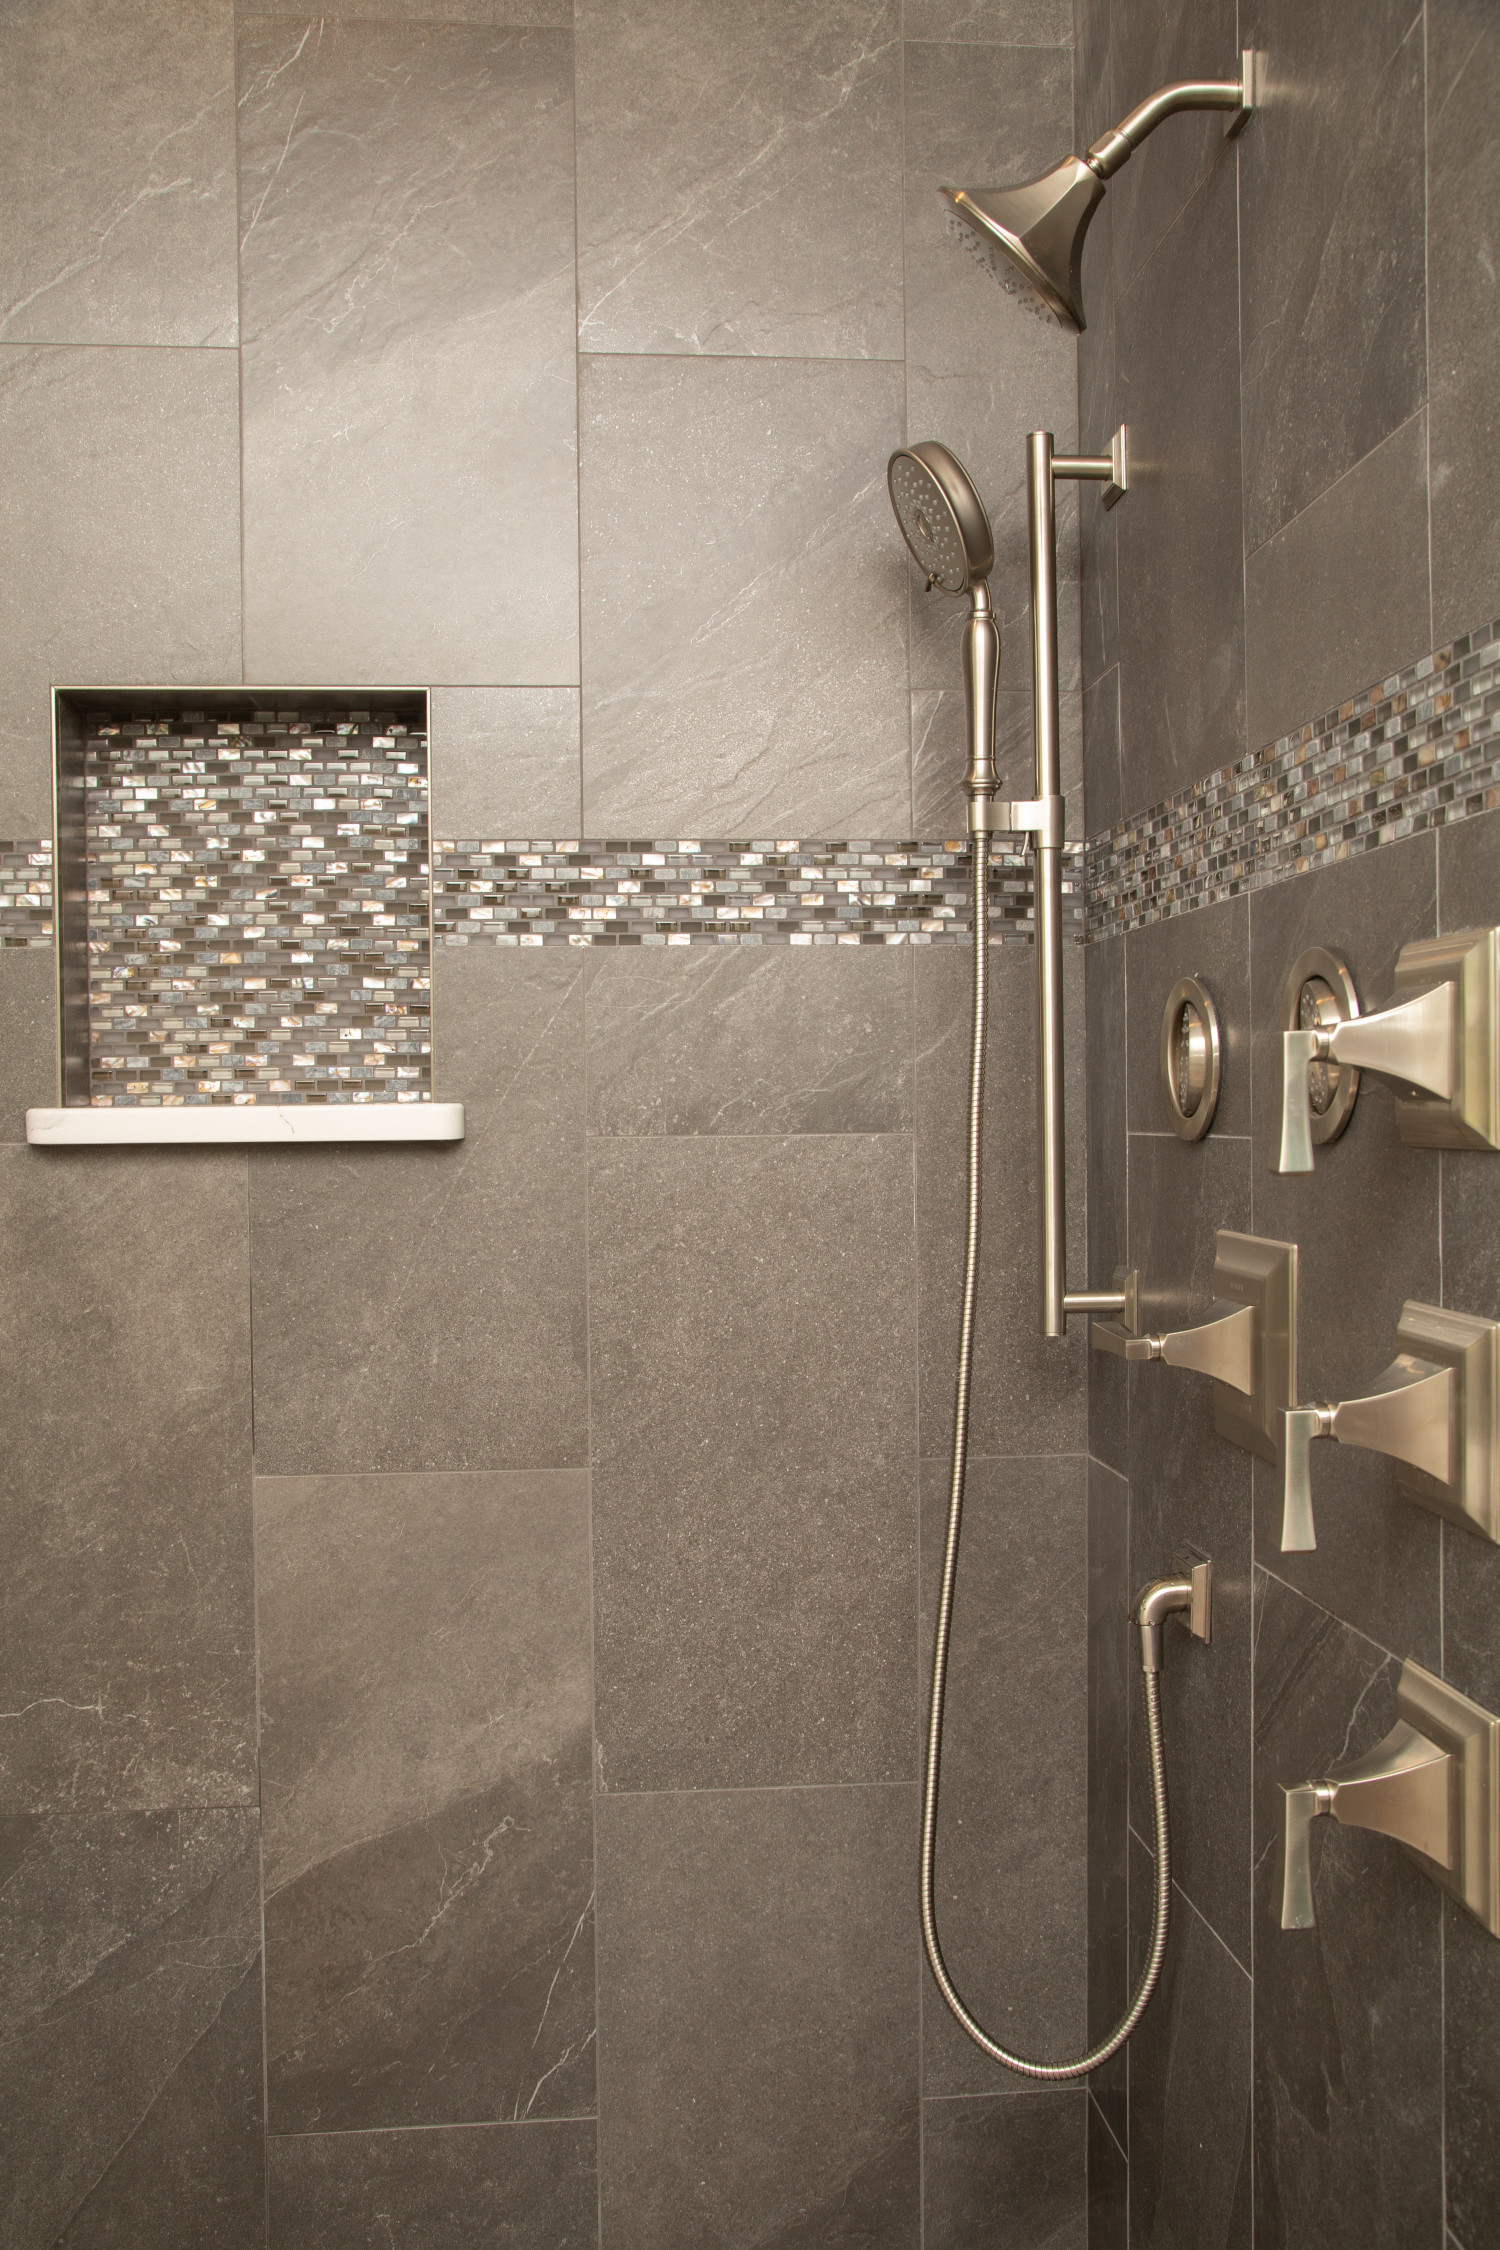 Tiled shower with multi-colored tile accents